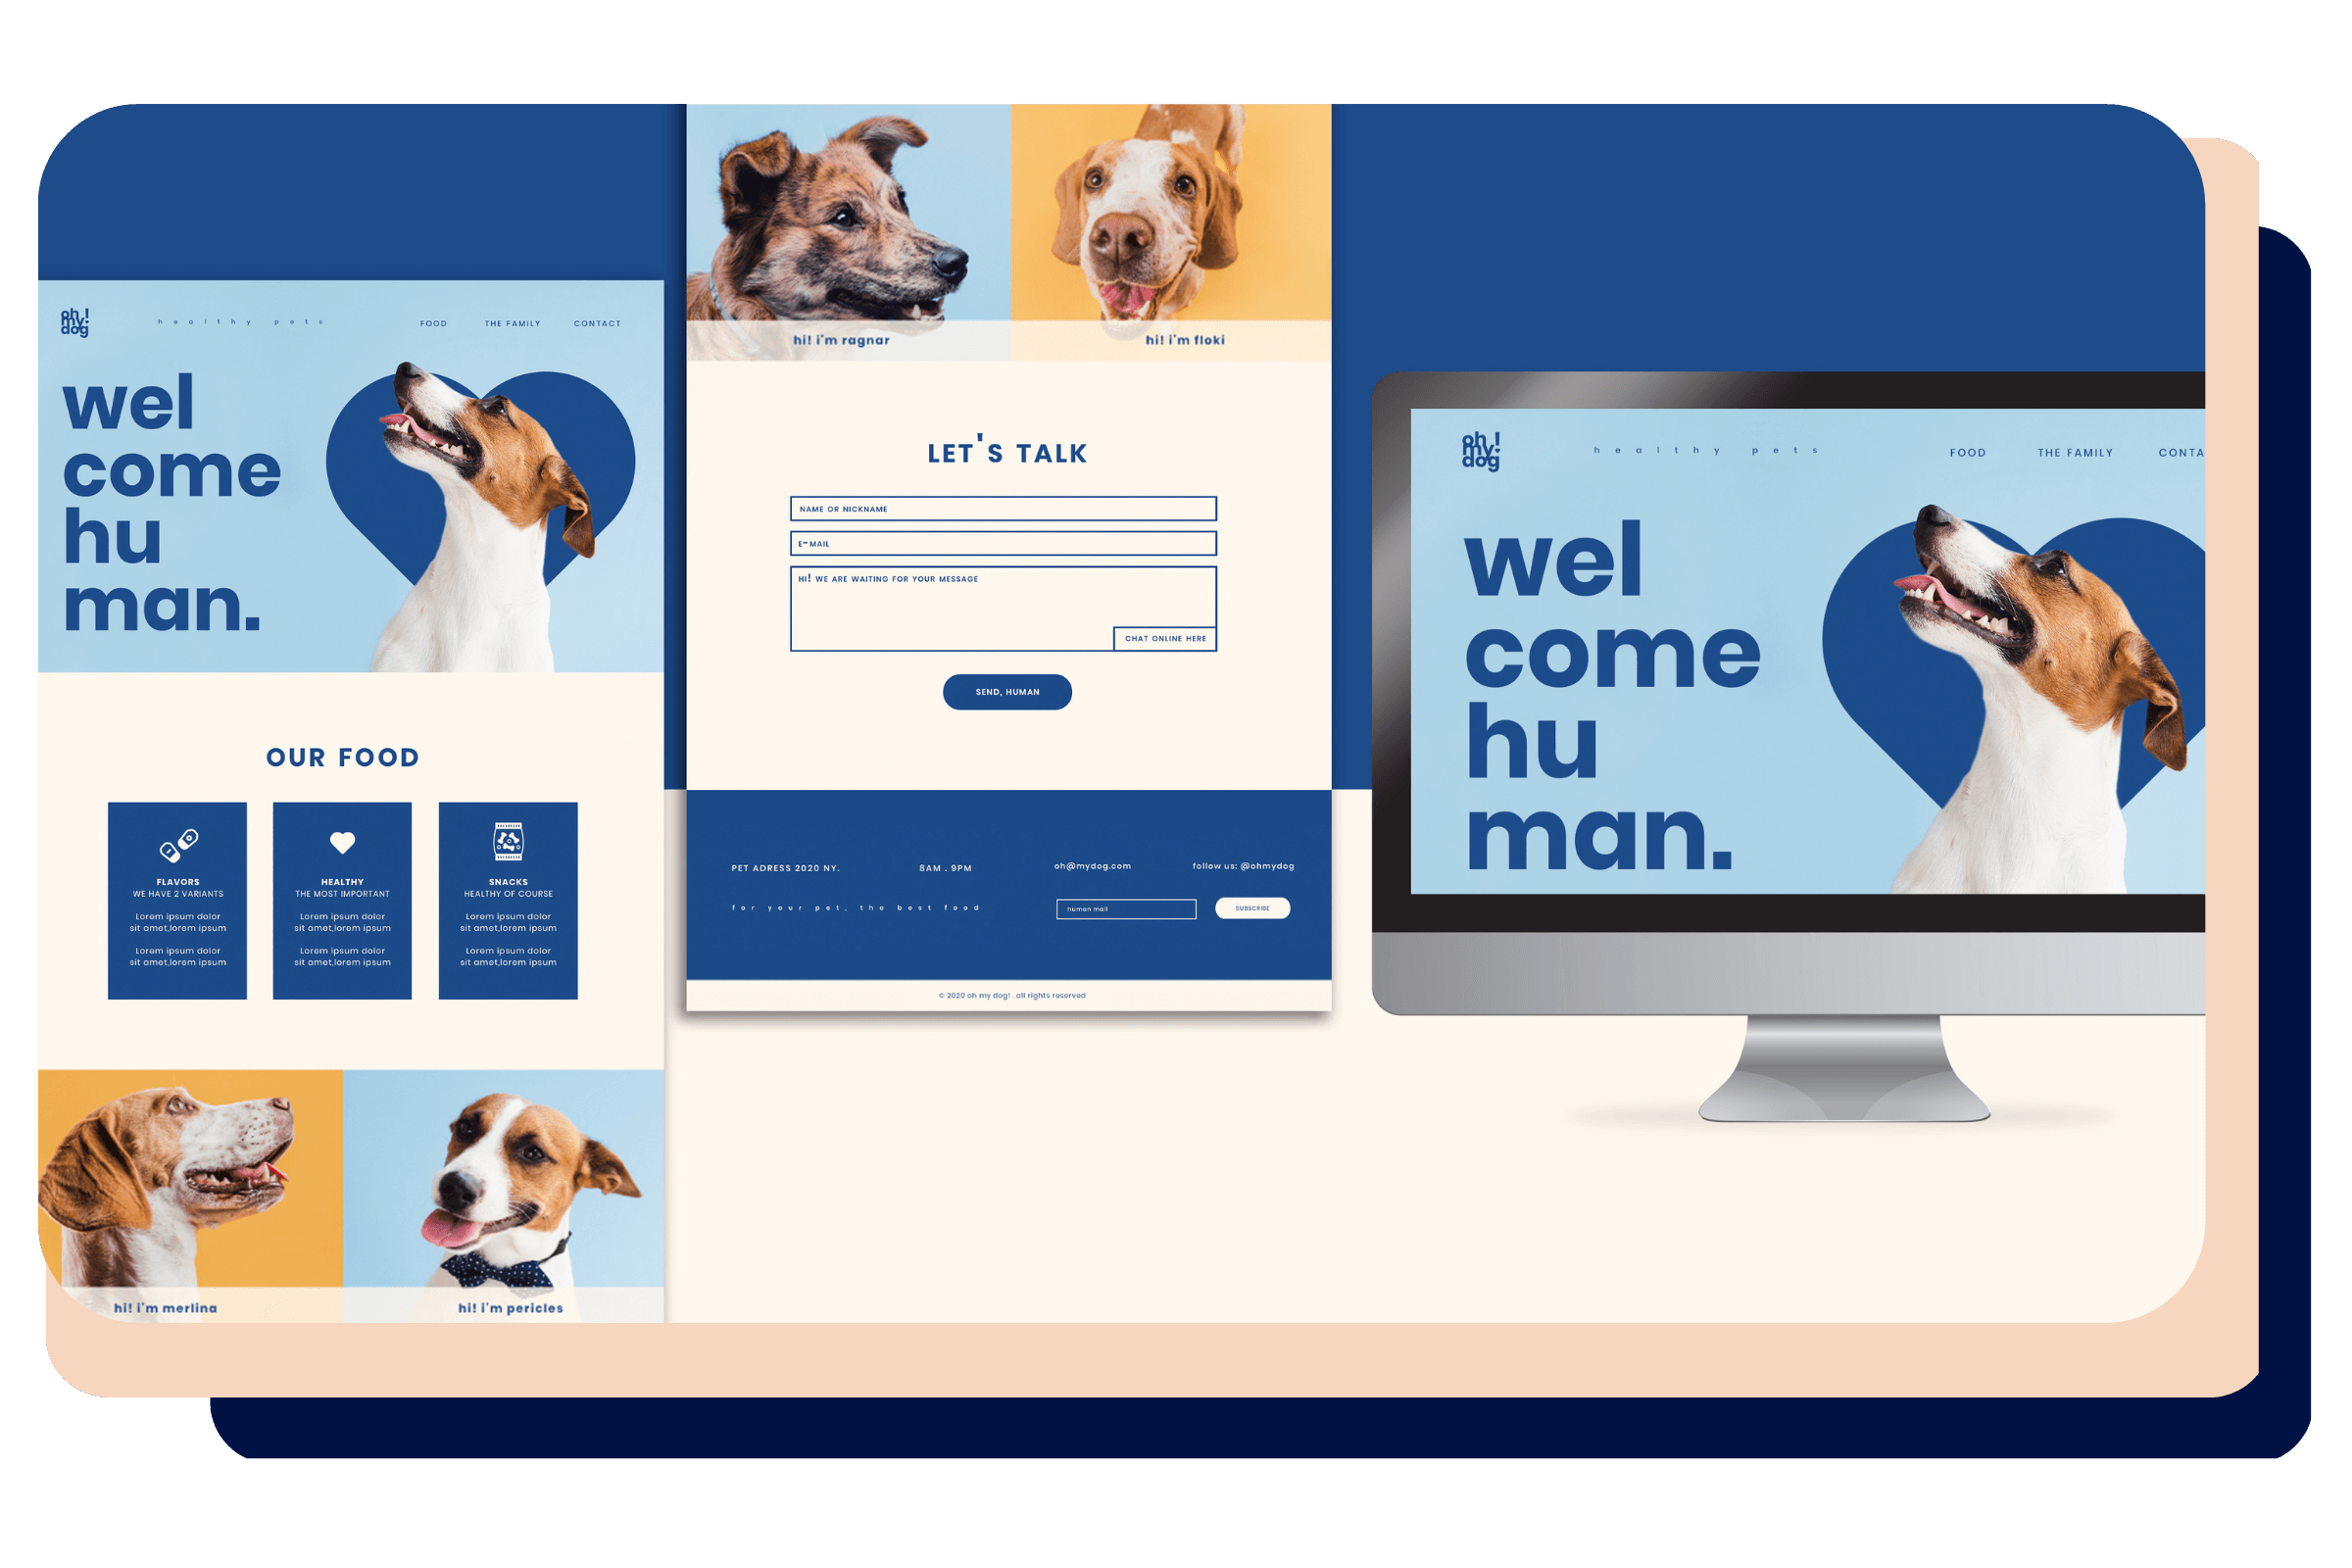 Email Marketing and Copywriting Services Ahlion Pet Care Digital Marketing Agency Shopify